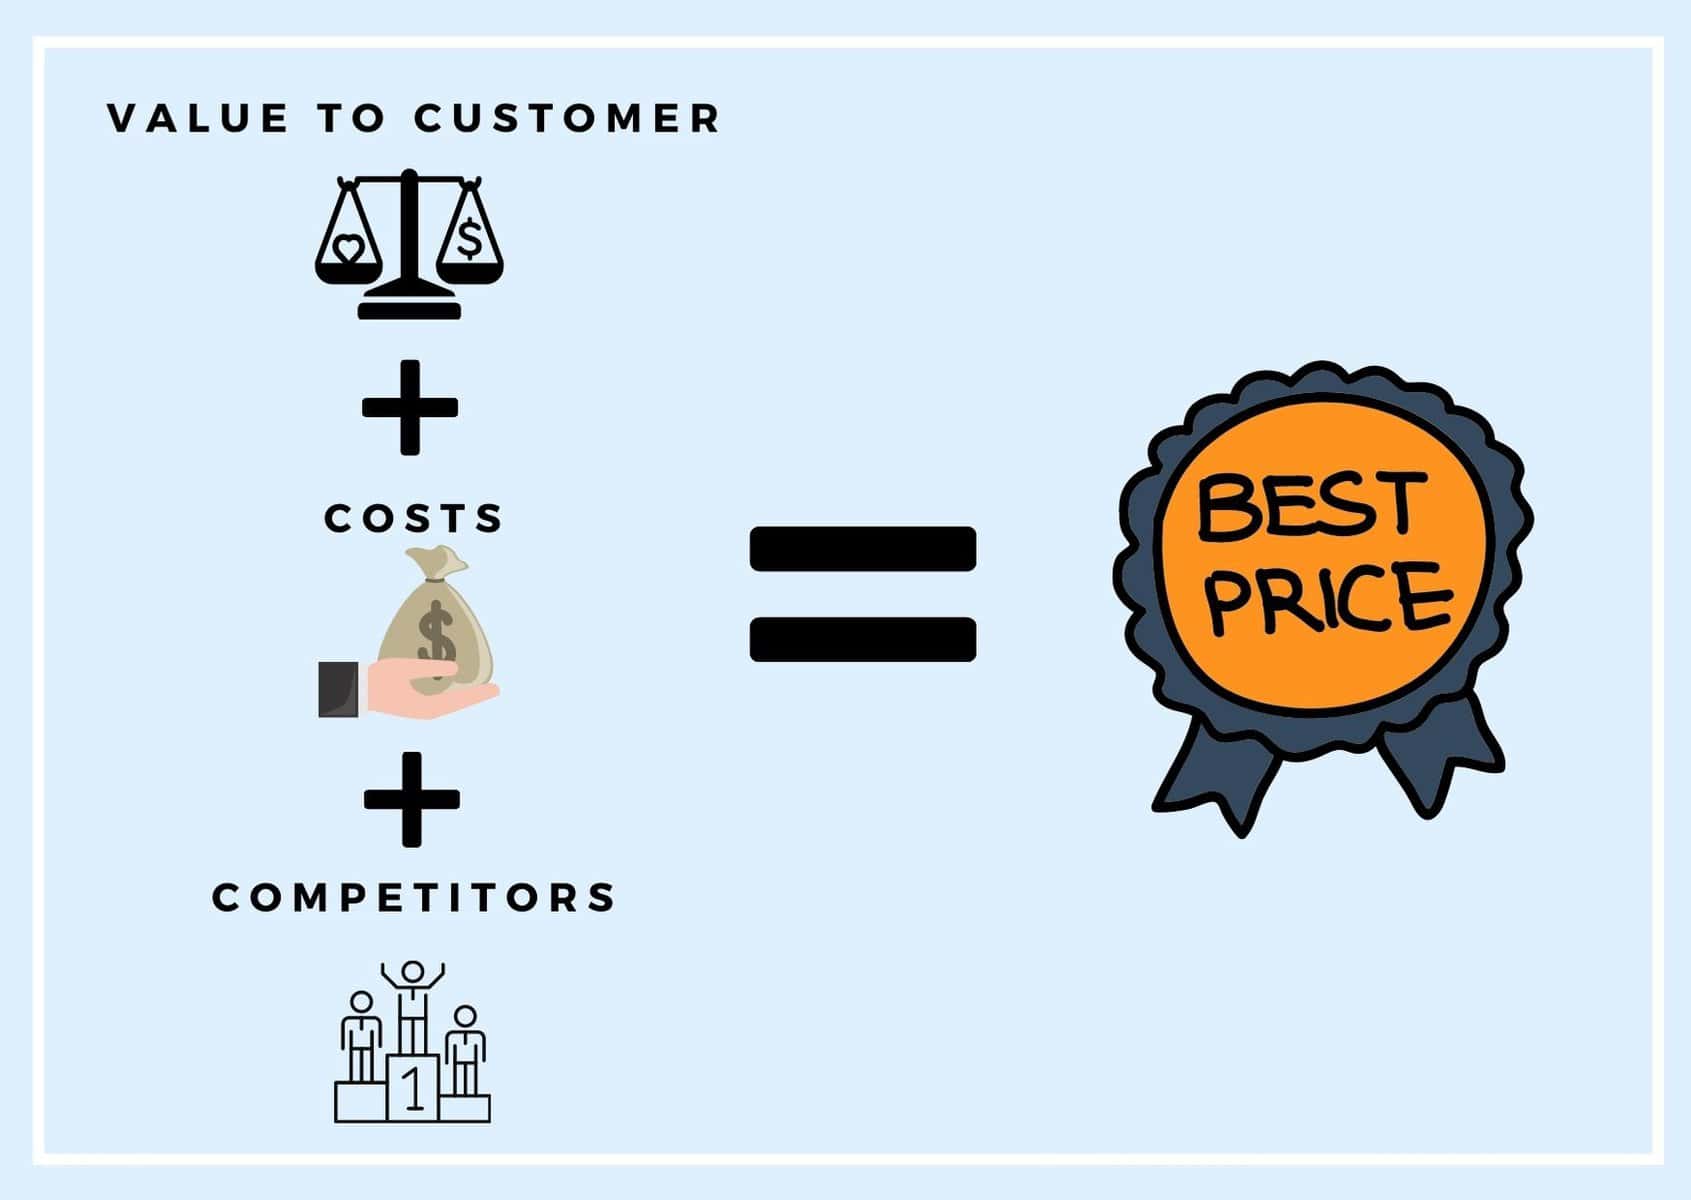 Combination pricing gives you the best of all components. 